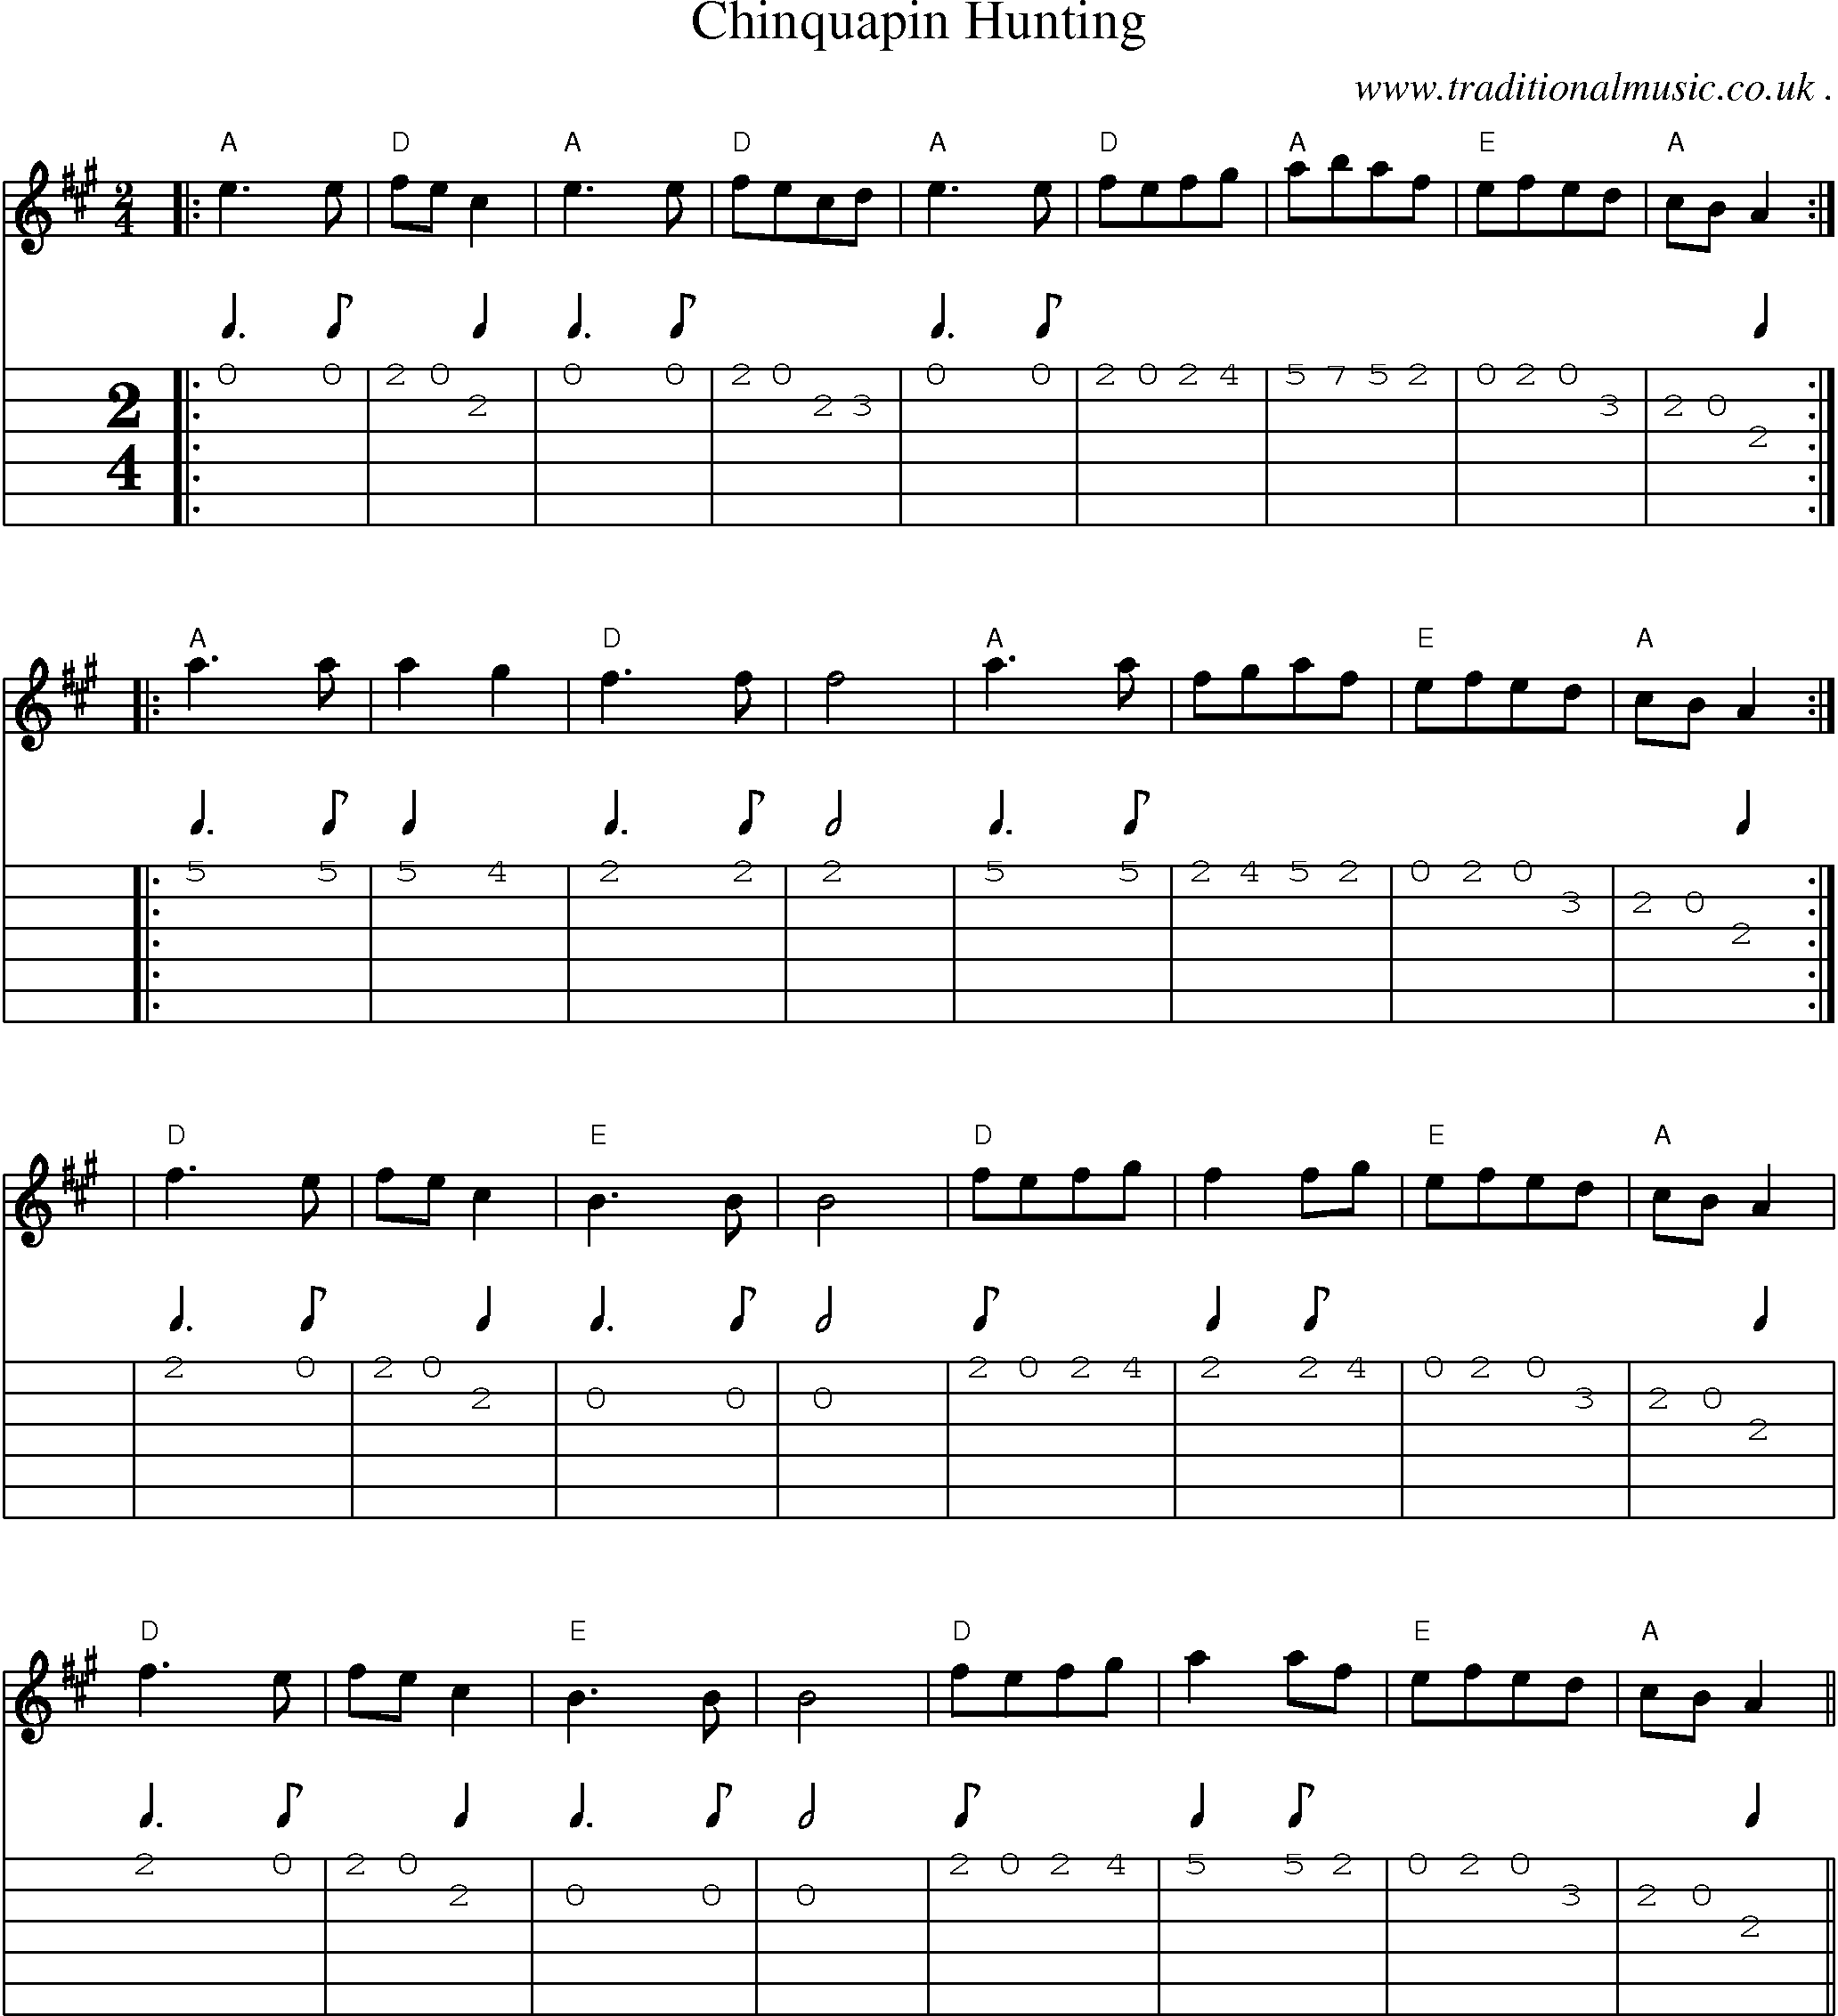 Music Score and Guitar Tabs for Chinquapin Hunting